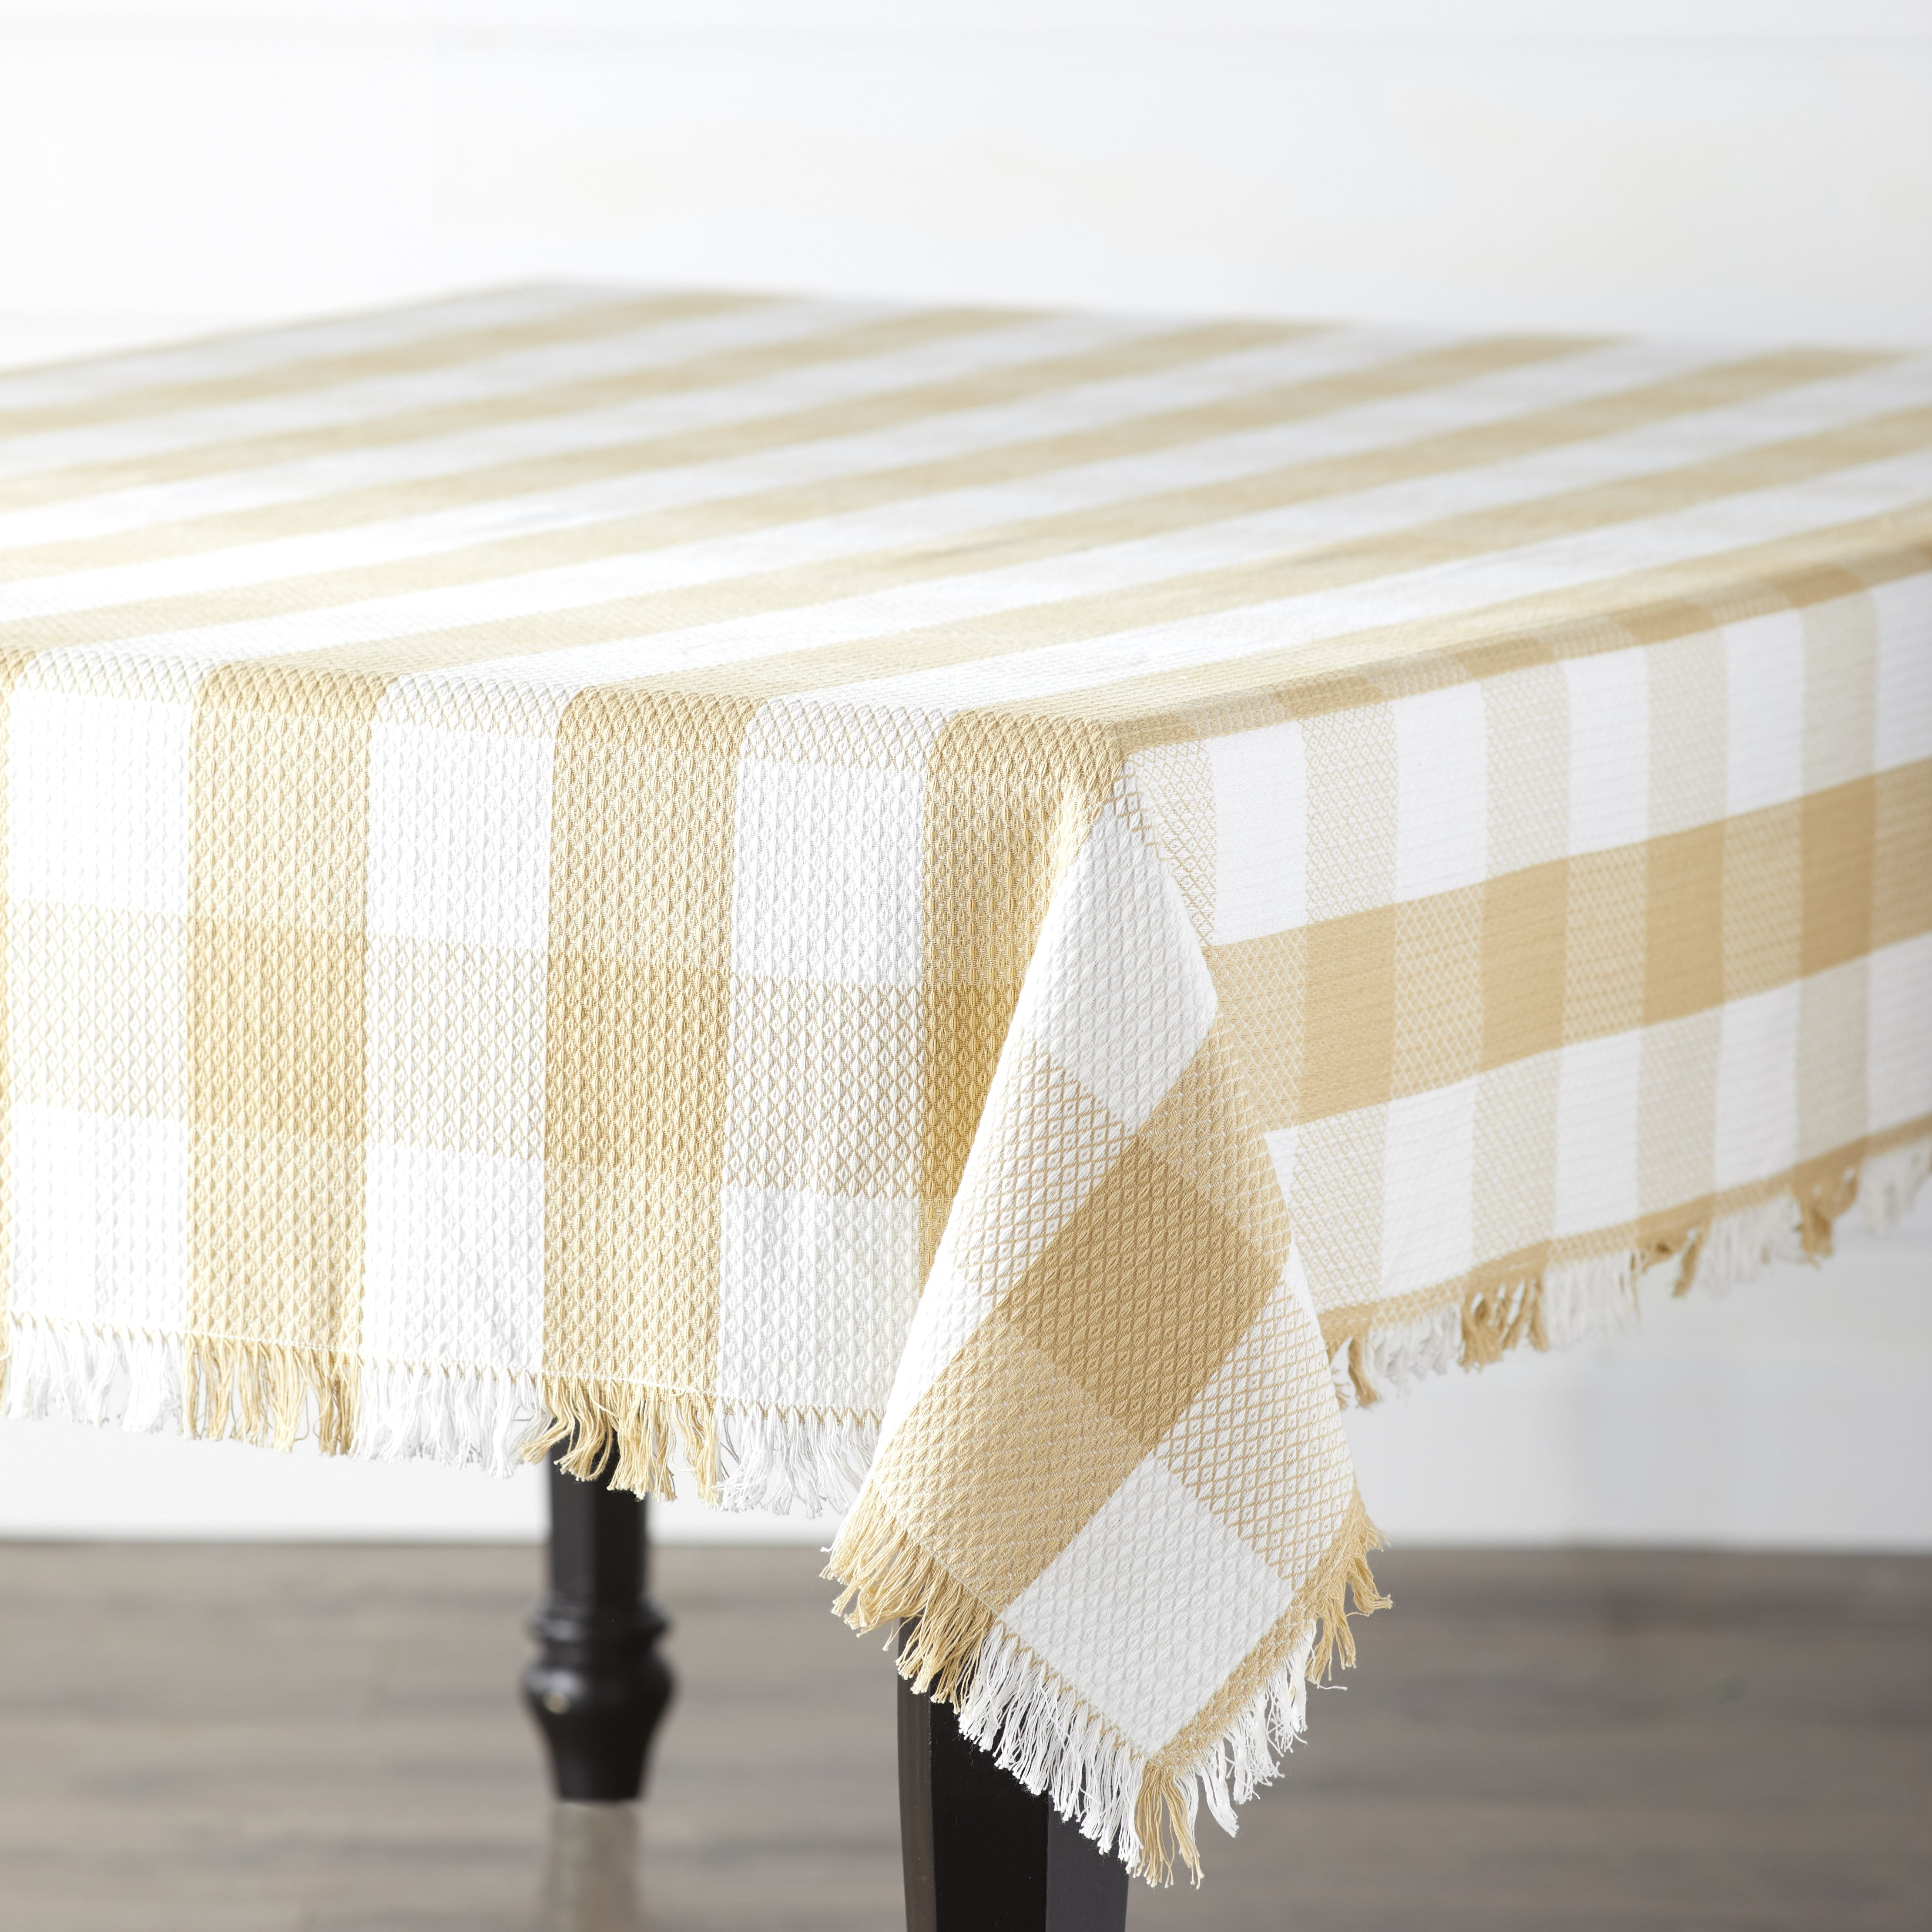 Details about   Home Brilliant Tablecloth Solid Soft Linen Farmhouse Checker Table Covers 